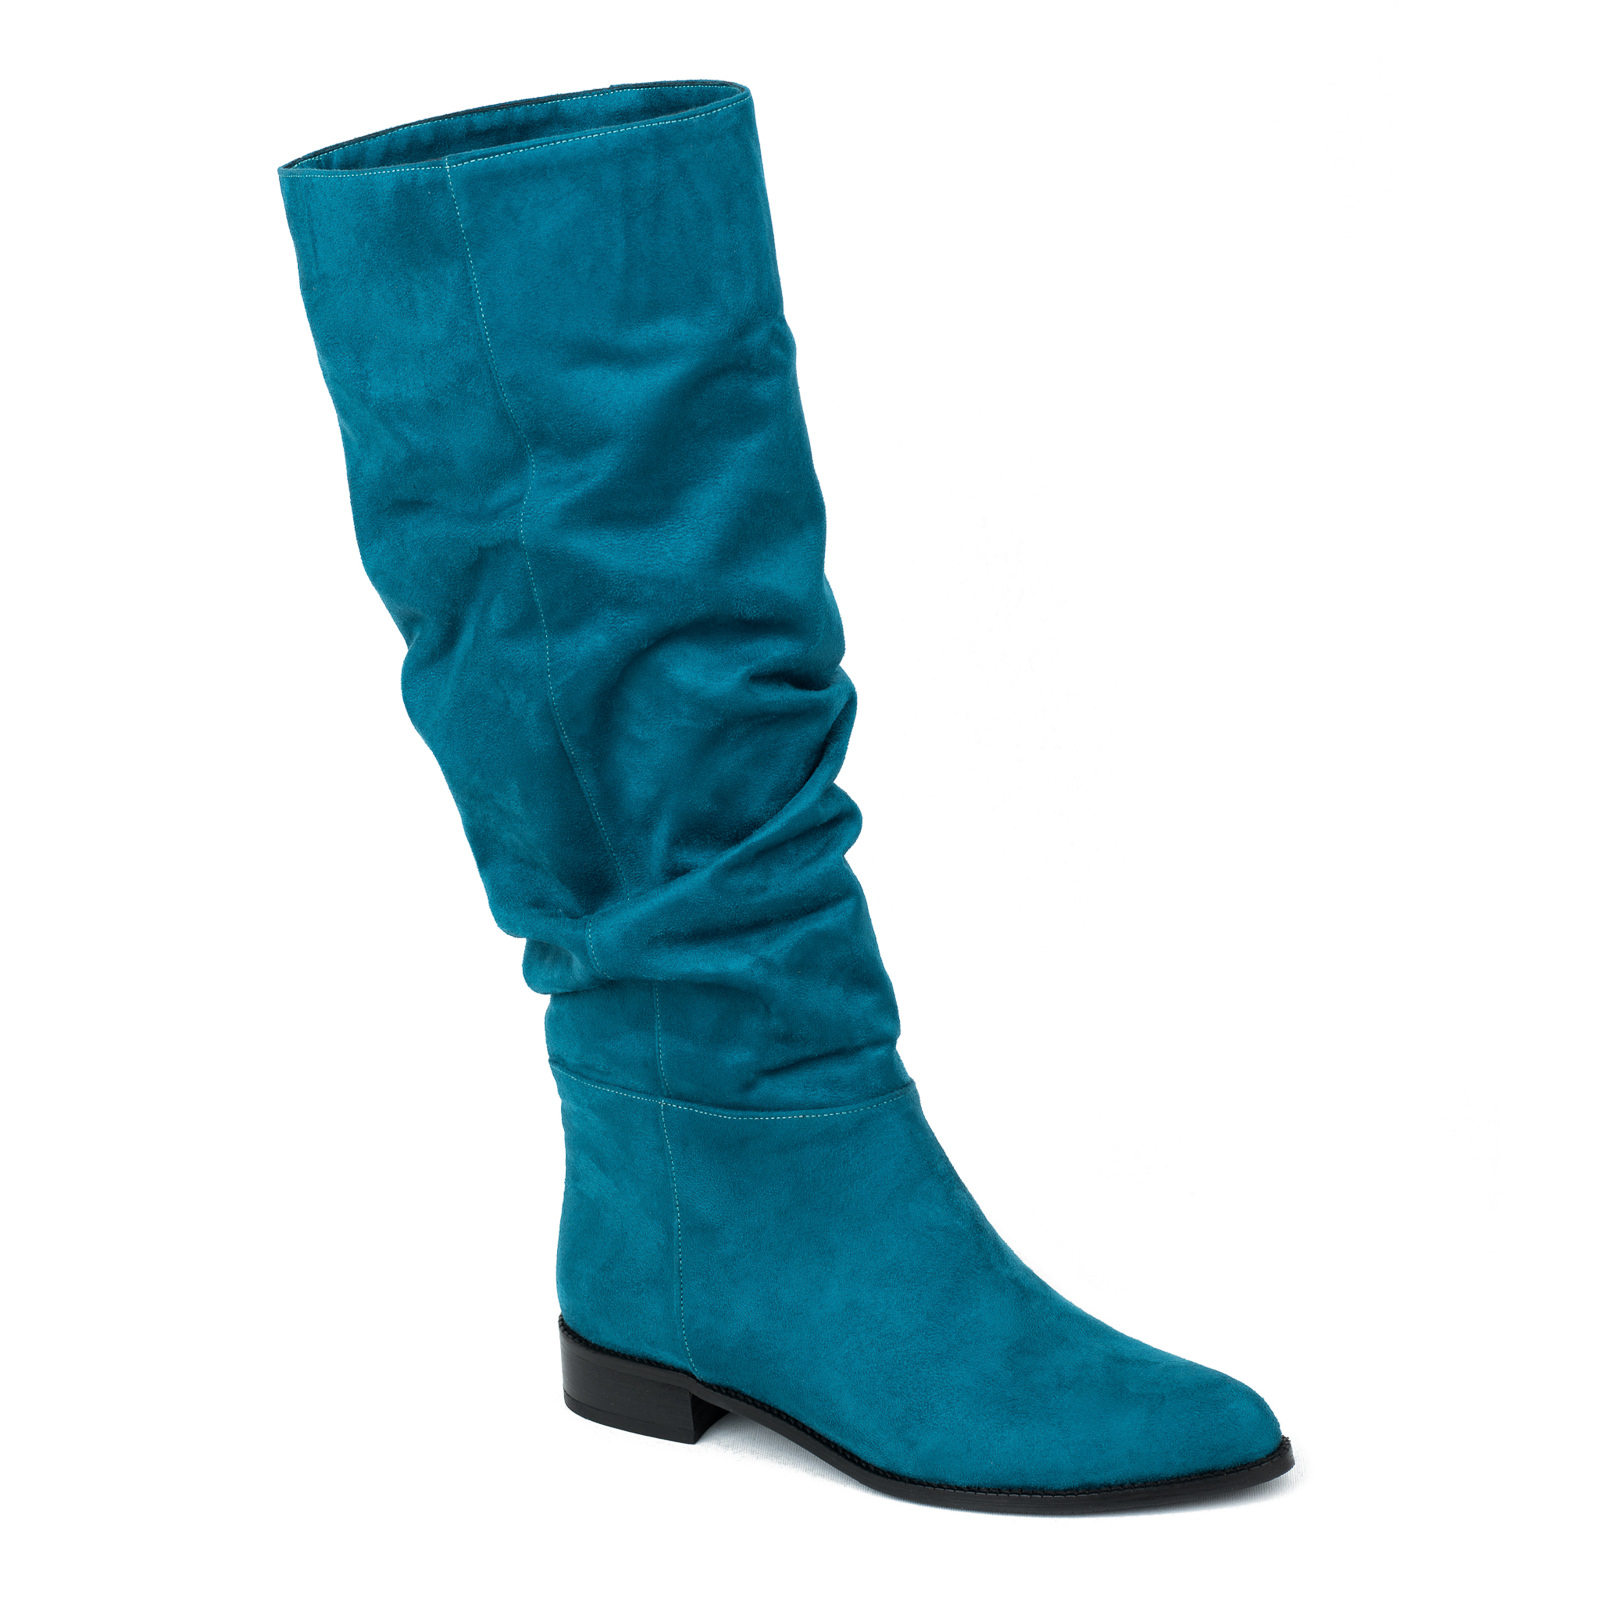 Women boots B508 - TURQUOISE